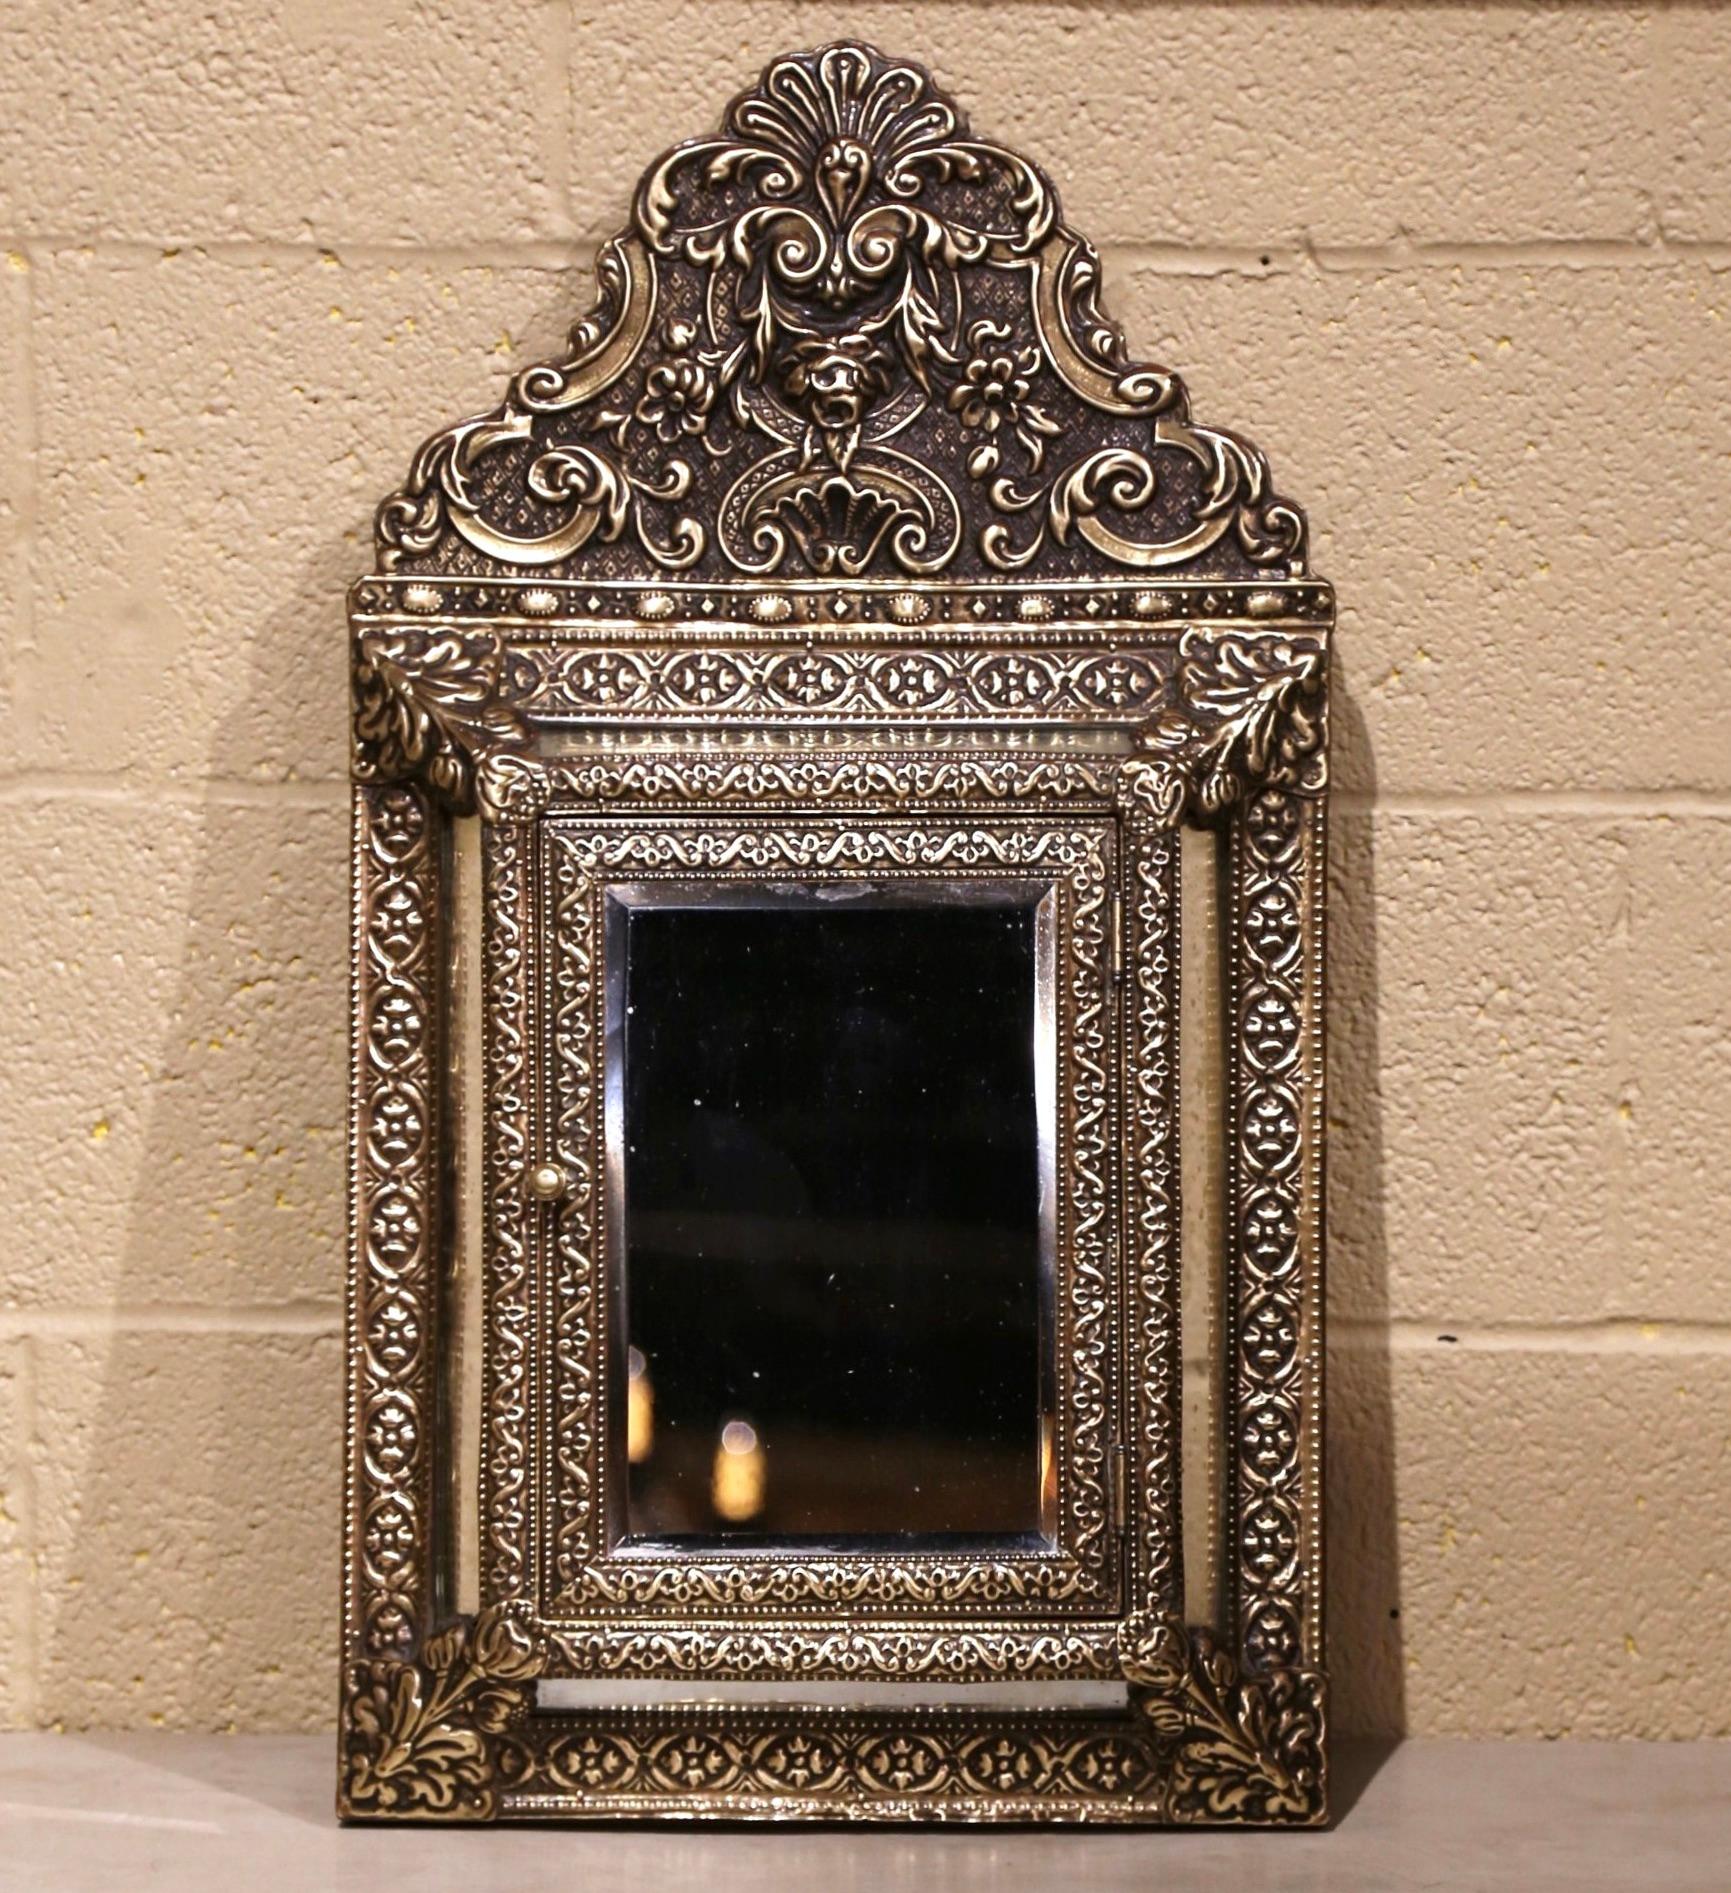 For ornate beauty with a secret compartment, look no further than this beautiful antique overlay brass mirror. Created in France, circa 1870, the petite mirror is decorated with intricate repousse motifs including a cartouche decor at the pediment.